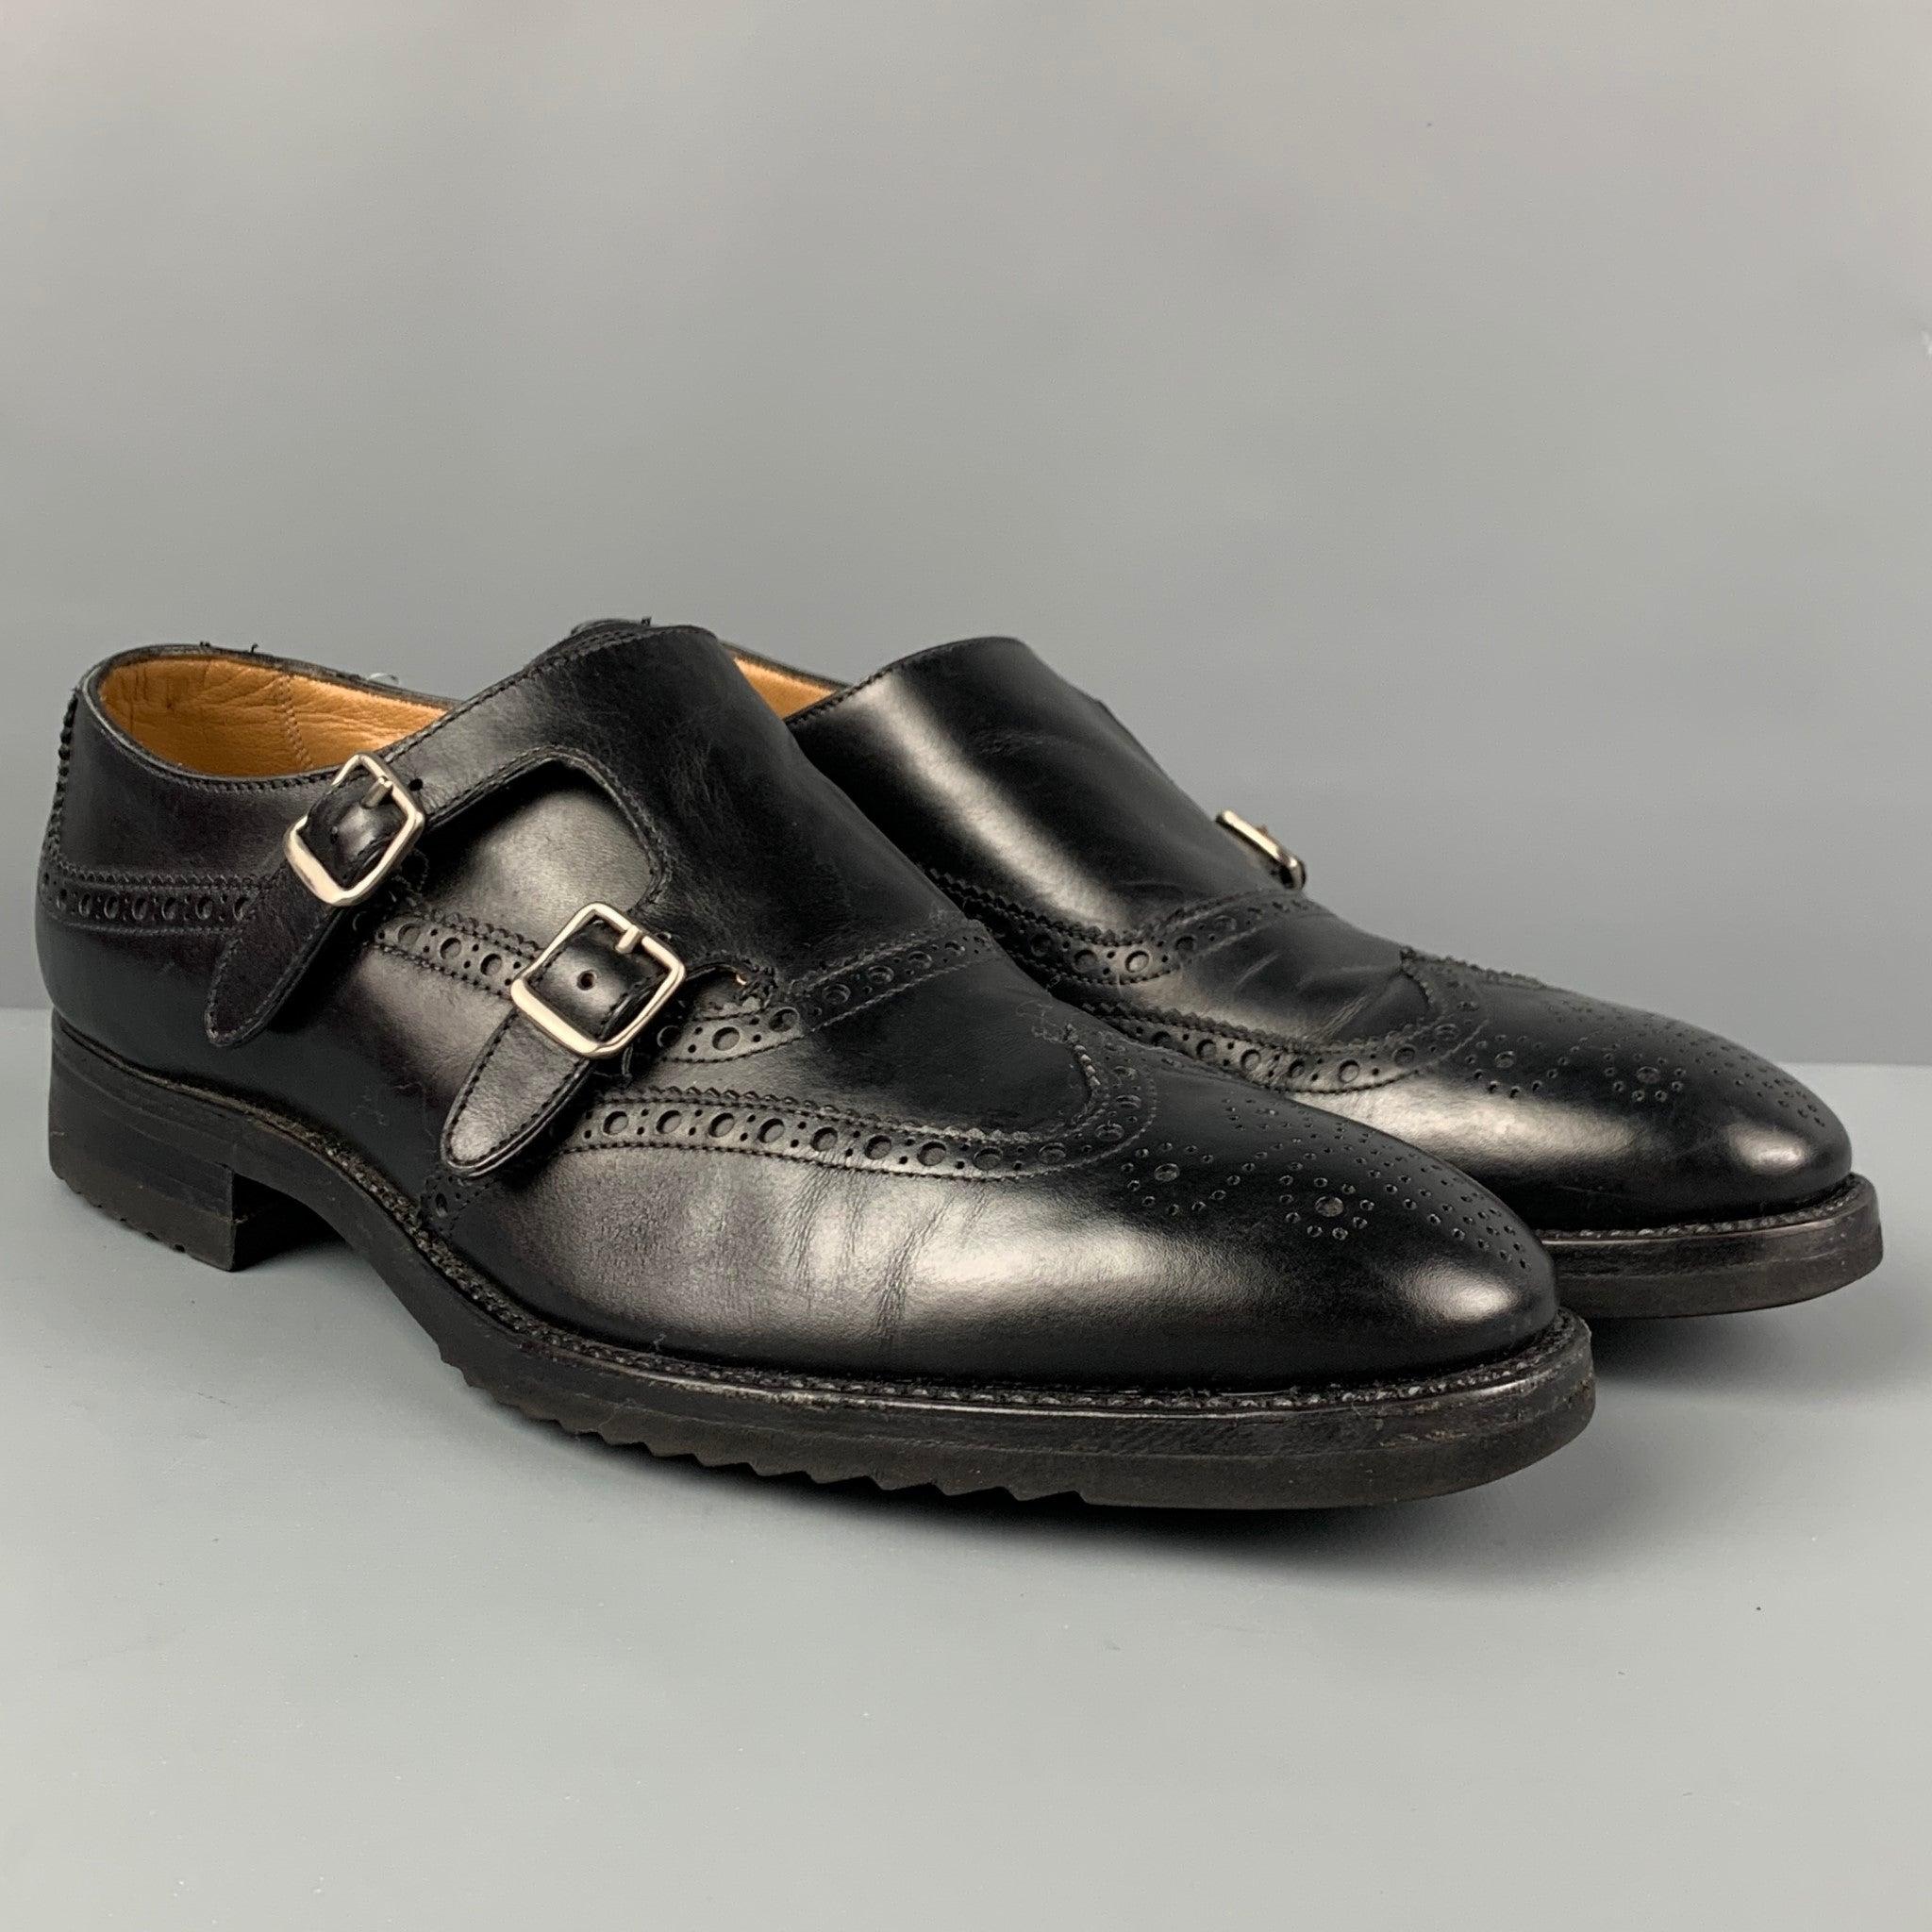 GRAVATI shoes comes in a black perforated leather featuring a double monk strap and a rubber sole. Made in Italy.
Very Good
Pre-Owned Condition. 

Marked:   19199 10 M
 787Outsole: 12 inches  x 4.25 inches 
  
  
 
Reference: 118113
Category: Lace